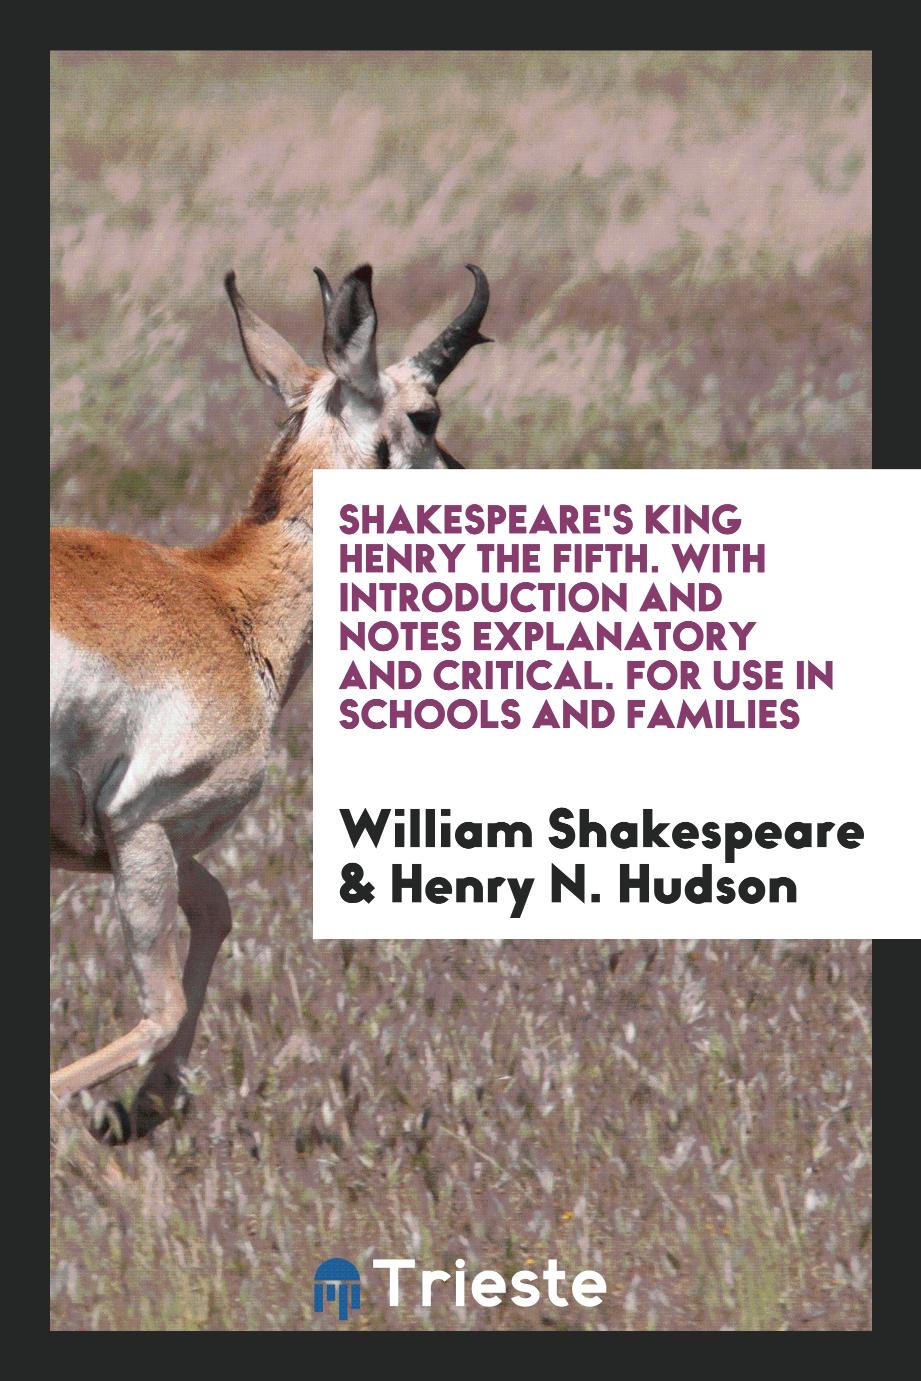 Shakespeare's King Henry the Fifth. With Introduction and Notes Explanatory and Critical. For Use in Schools and Families